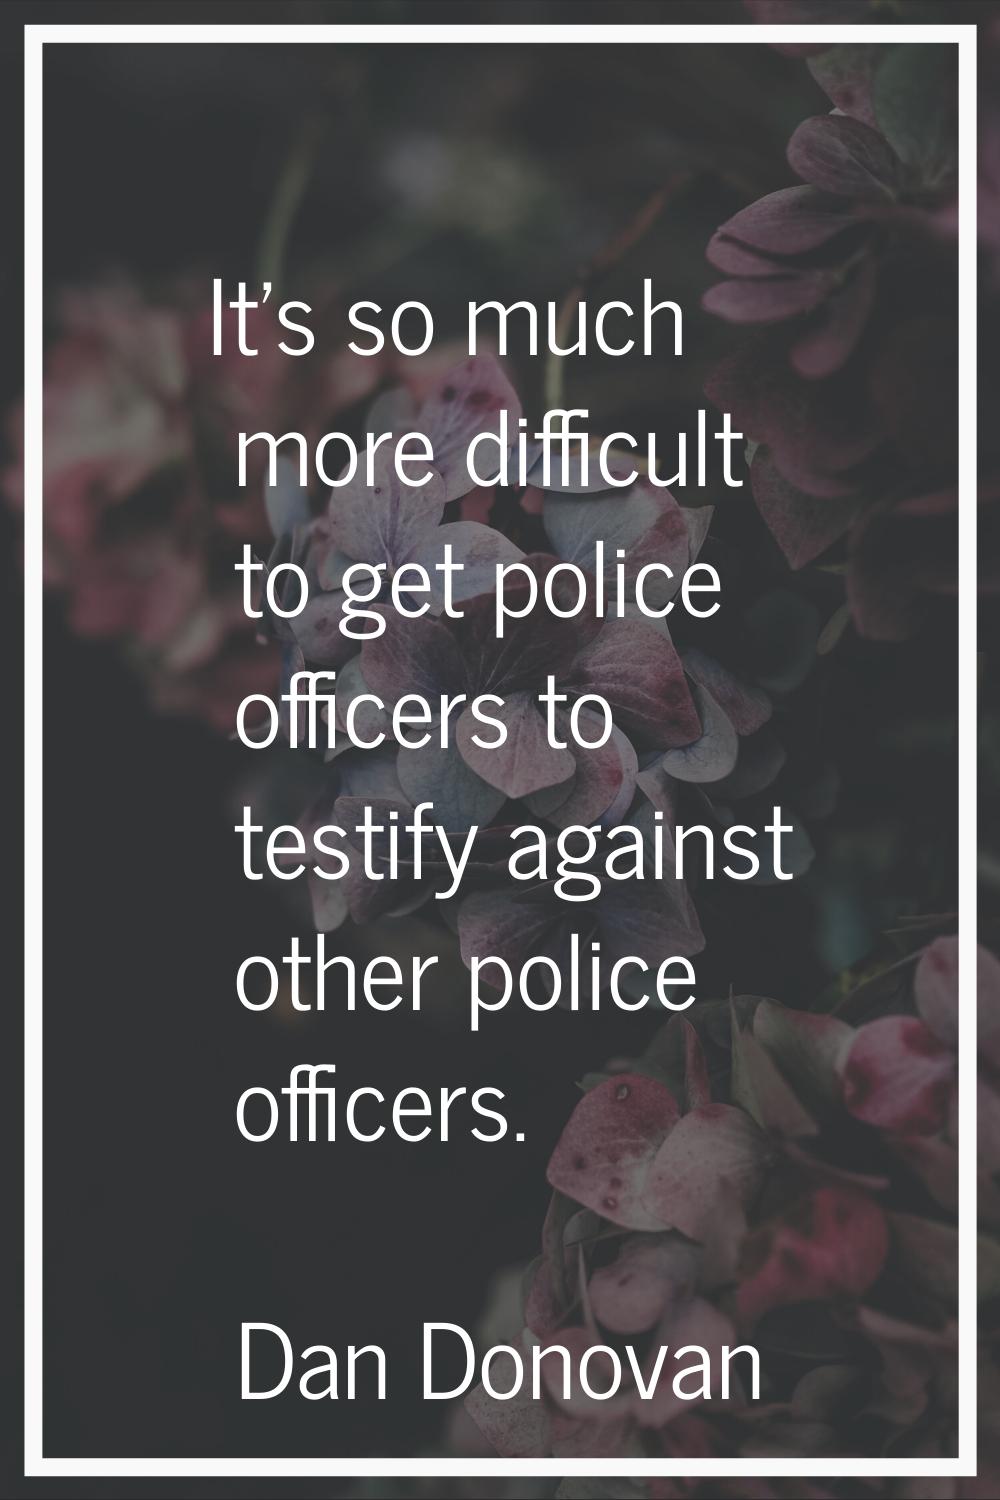 It's so much more difficult to get police officers to testify against other police officers.